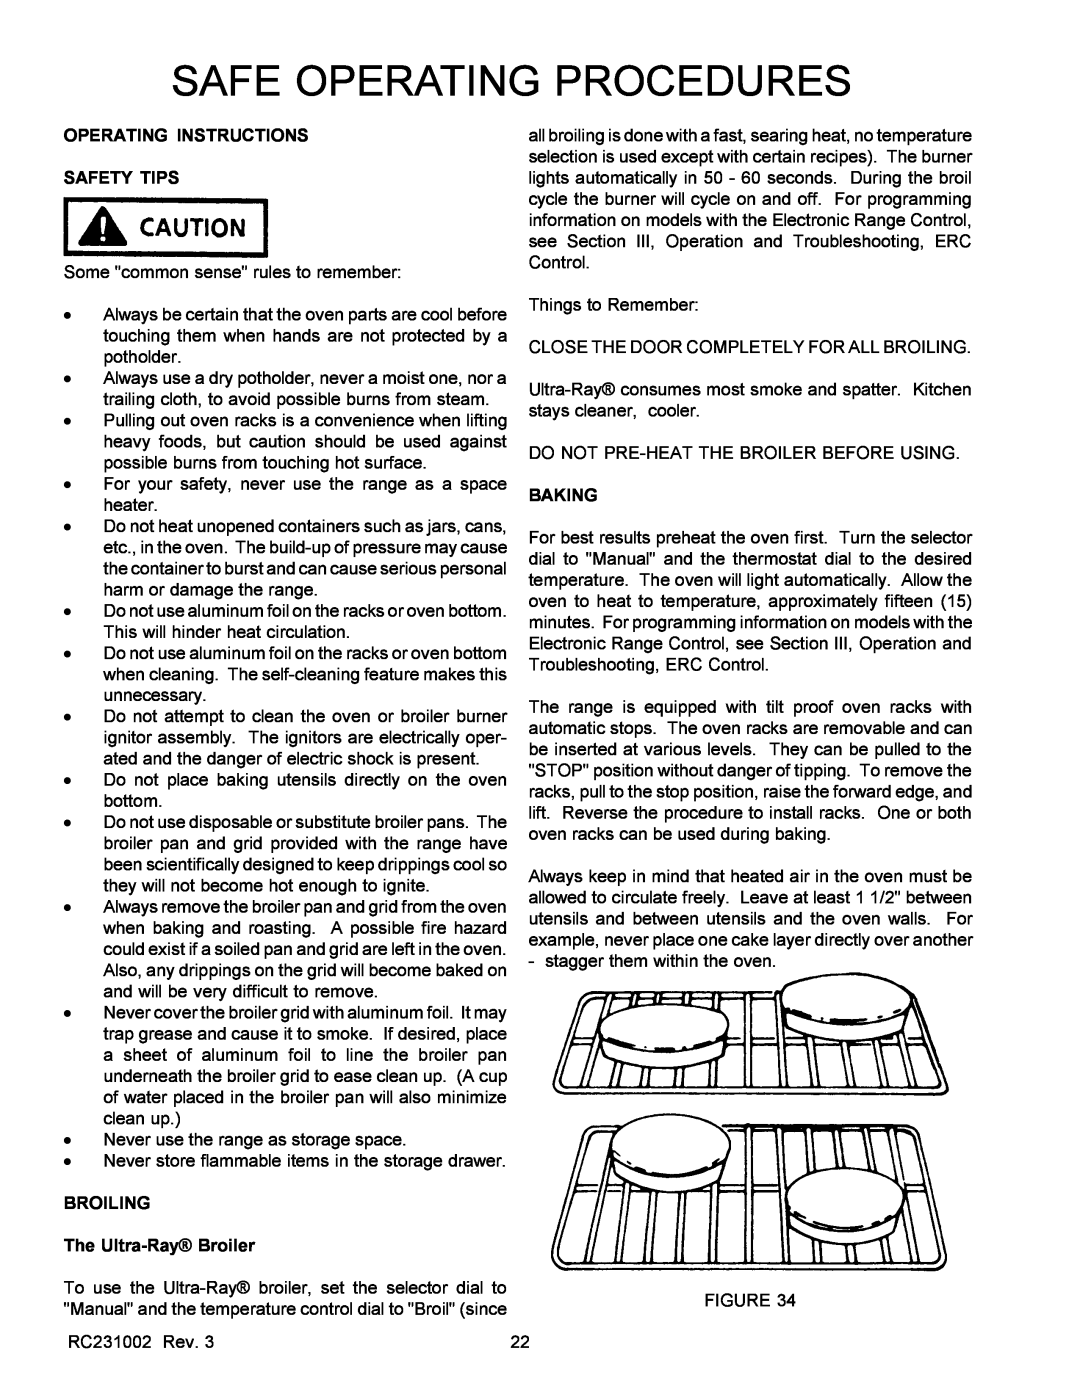 Amana RST, RSS Operating Instructions Safety Tips, BROILING The Ultra-Ray Broiler, Baking, Safe Operating Procedures 